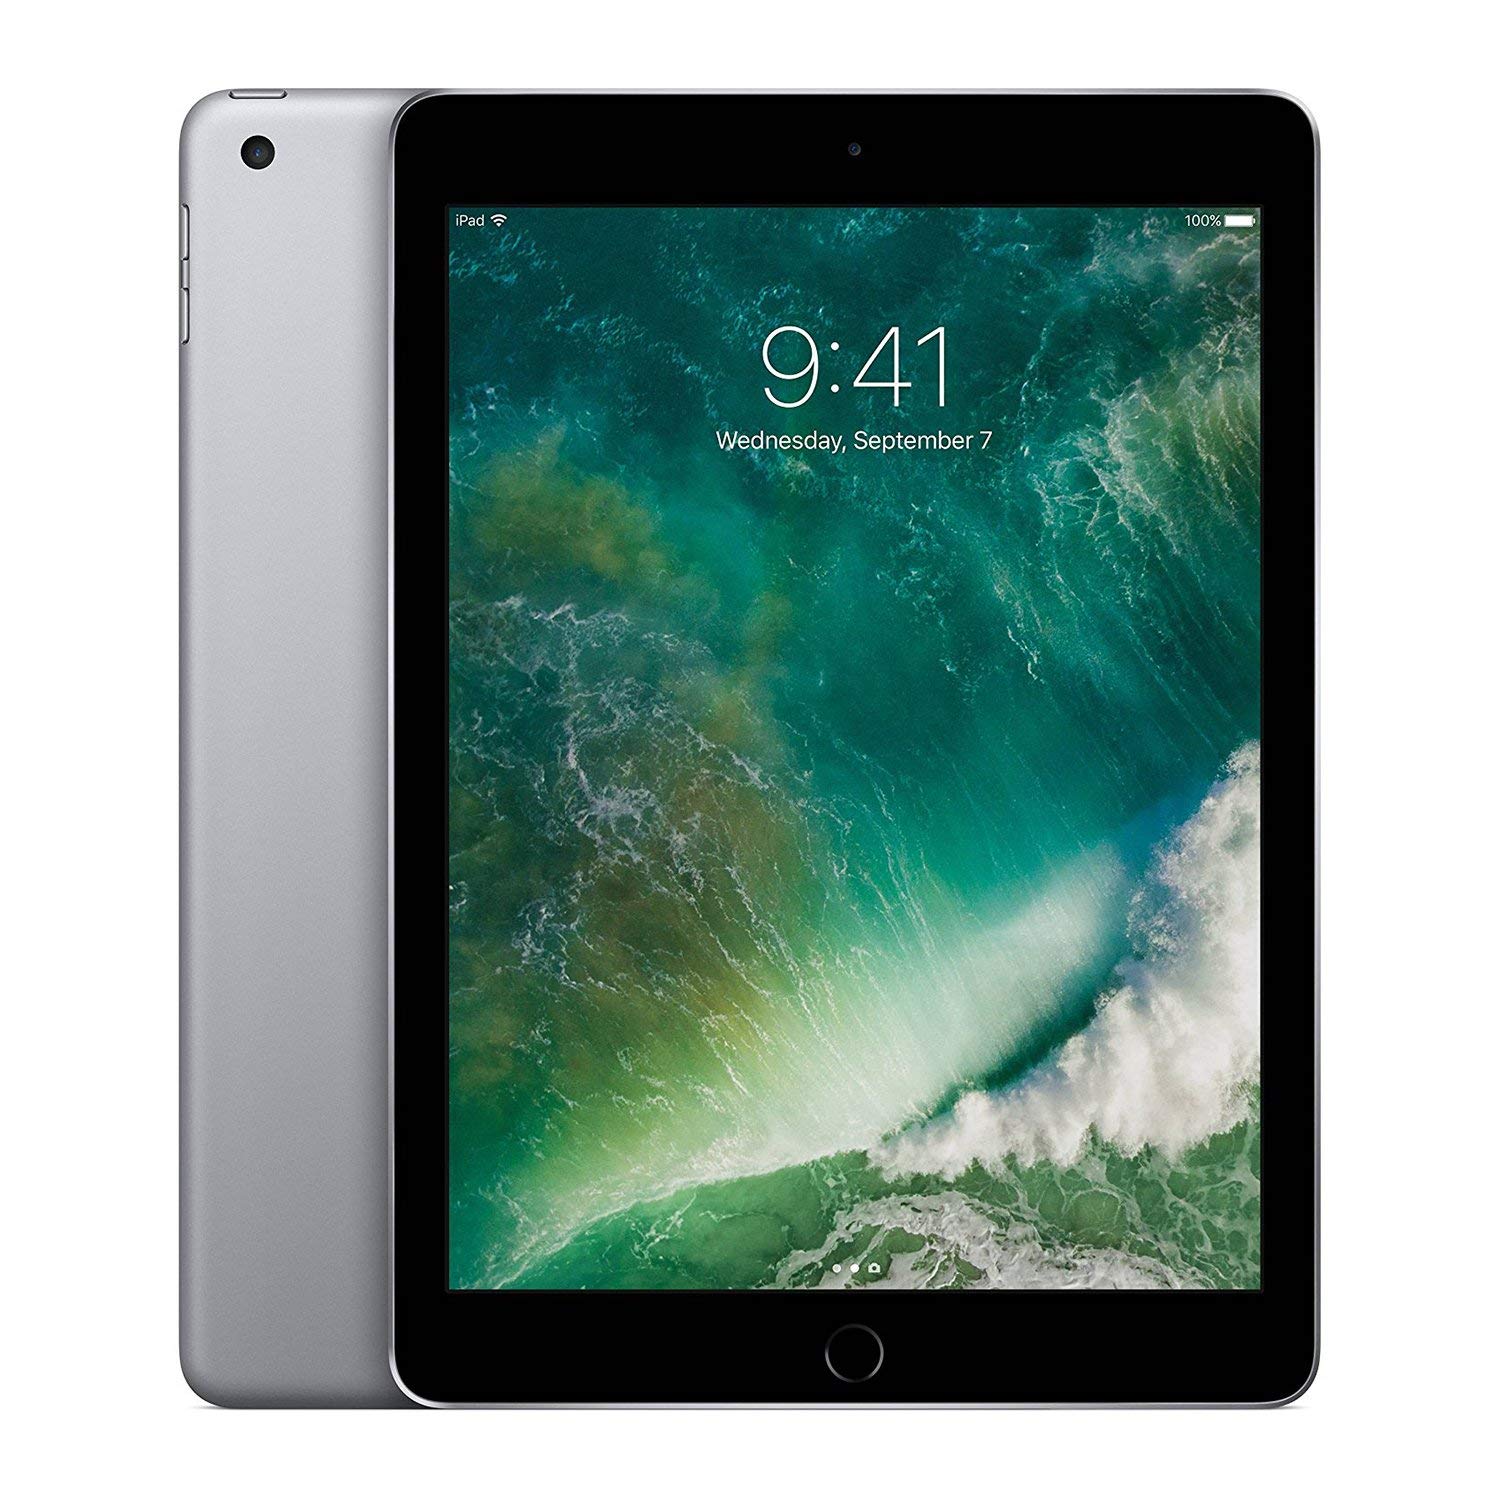 Tablet Apple iPad with WiFi, 32GB, Space Gray (2017 Model)